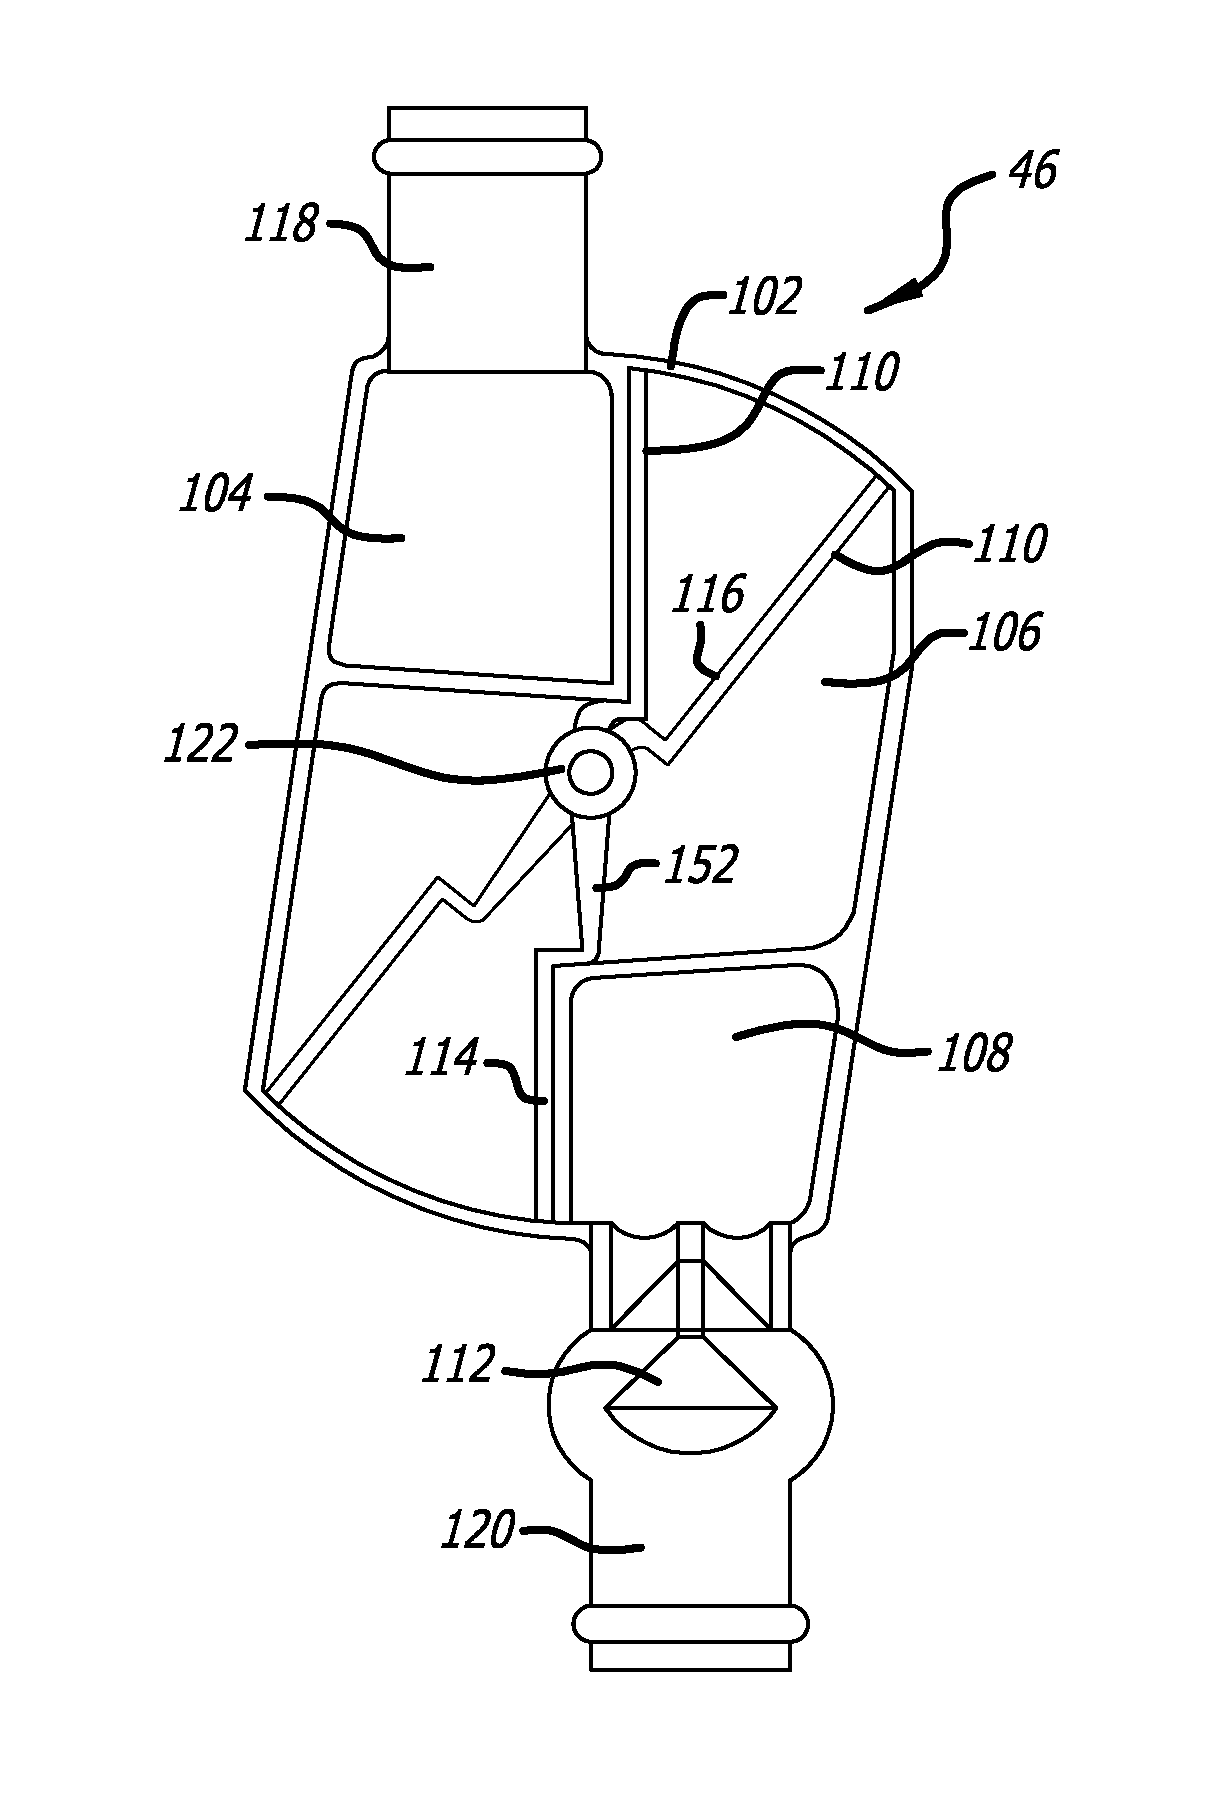 Compact air stop valve for aircraft galley plumbing system